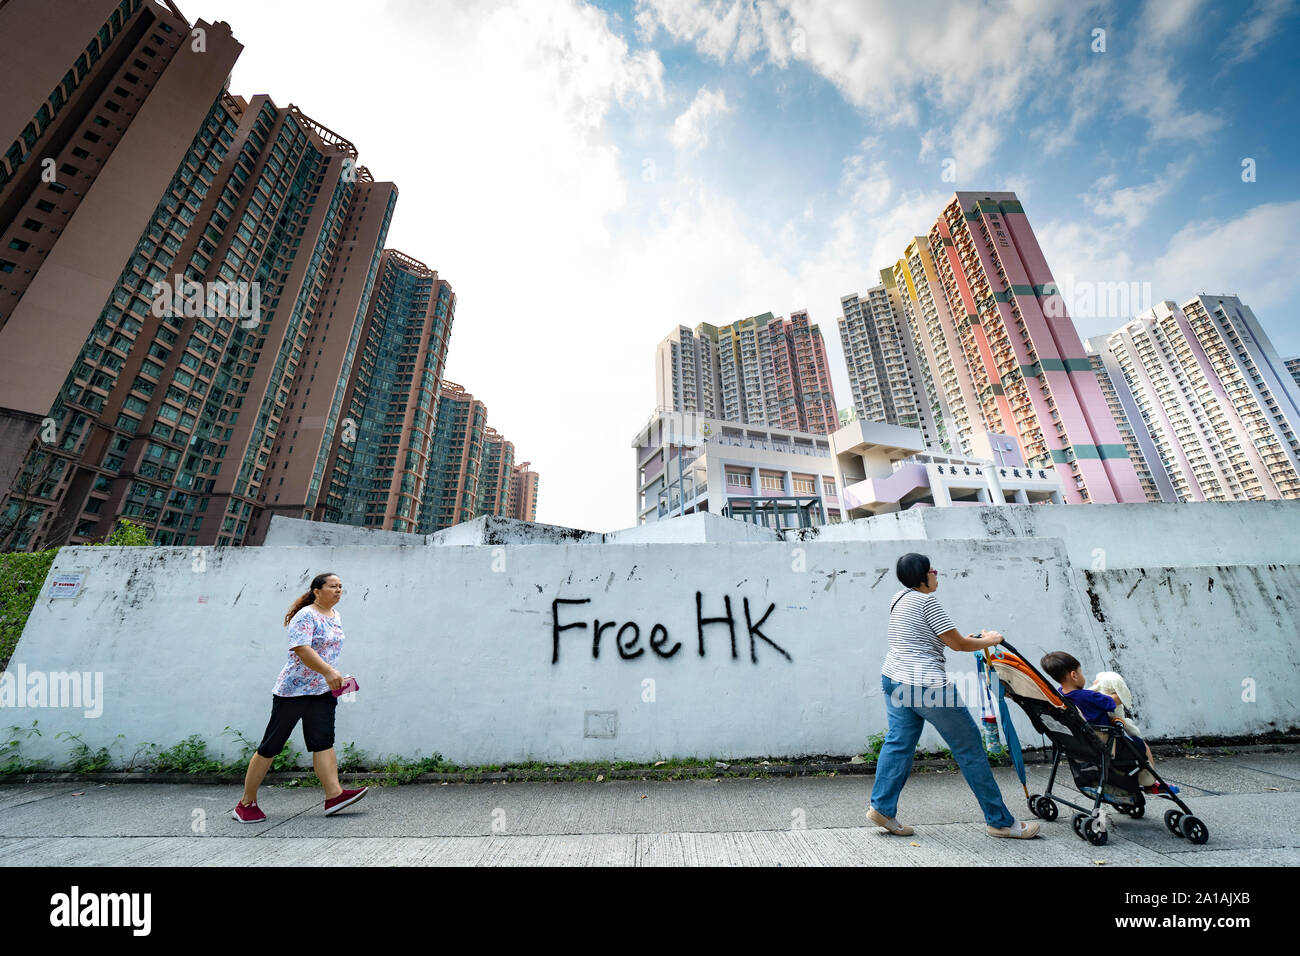 Pro democracy and anti extradition law protest graffiti on wall near housing estates in Ma On Shan in Hong Kong Stock Photo